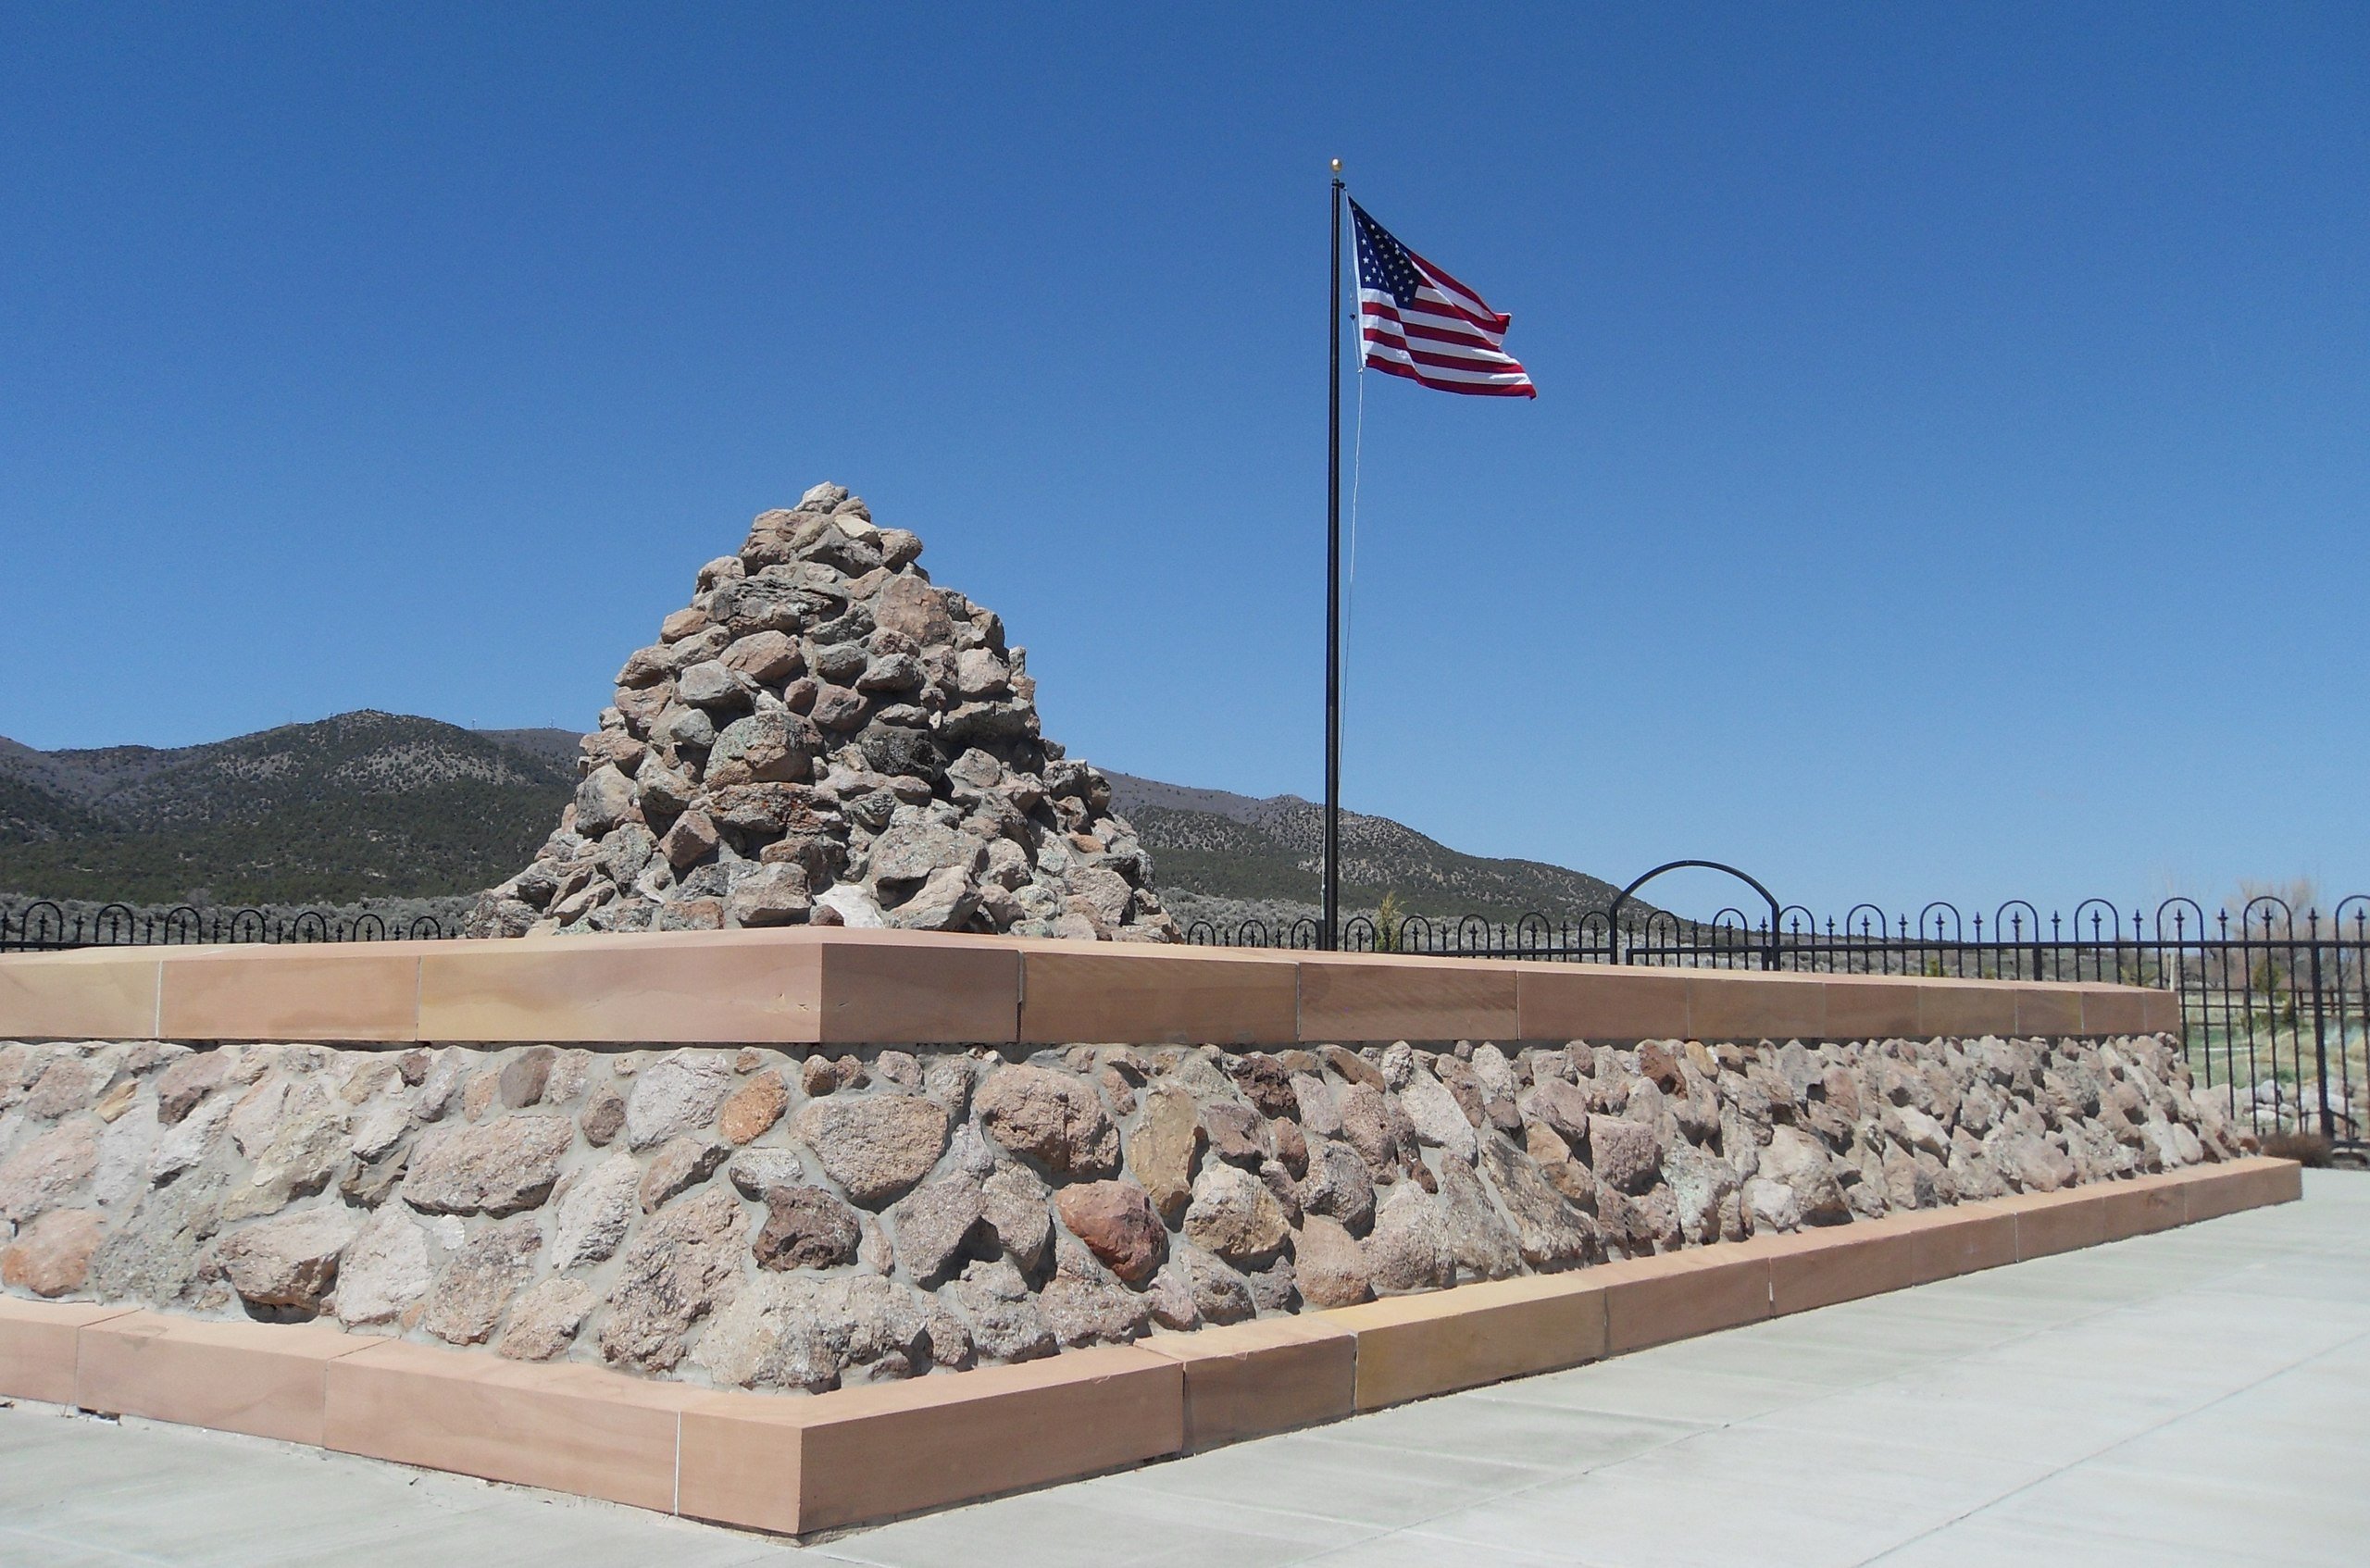 Monument and cairn at the site of the Mountain Meadows Massacre erected in 1999.